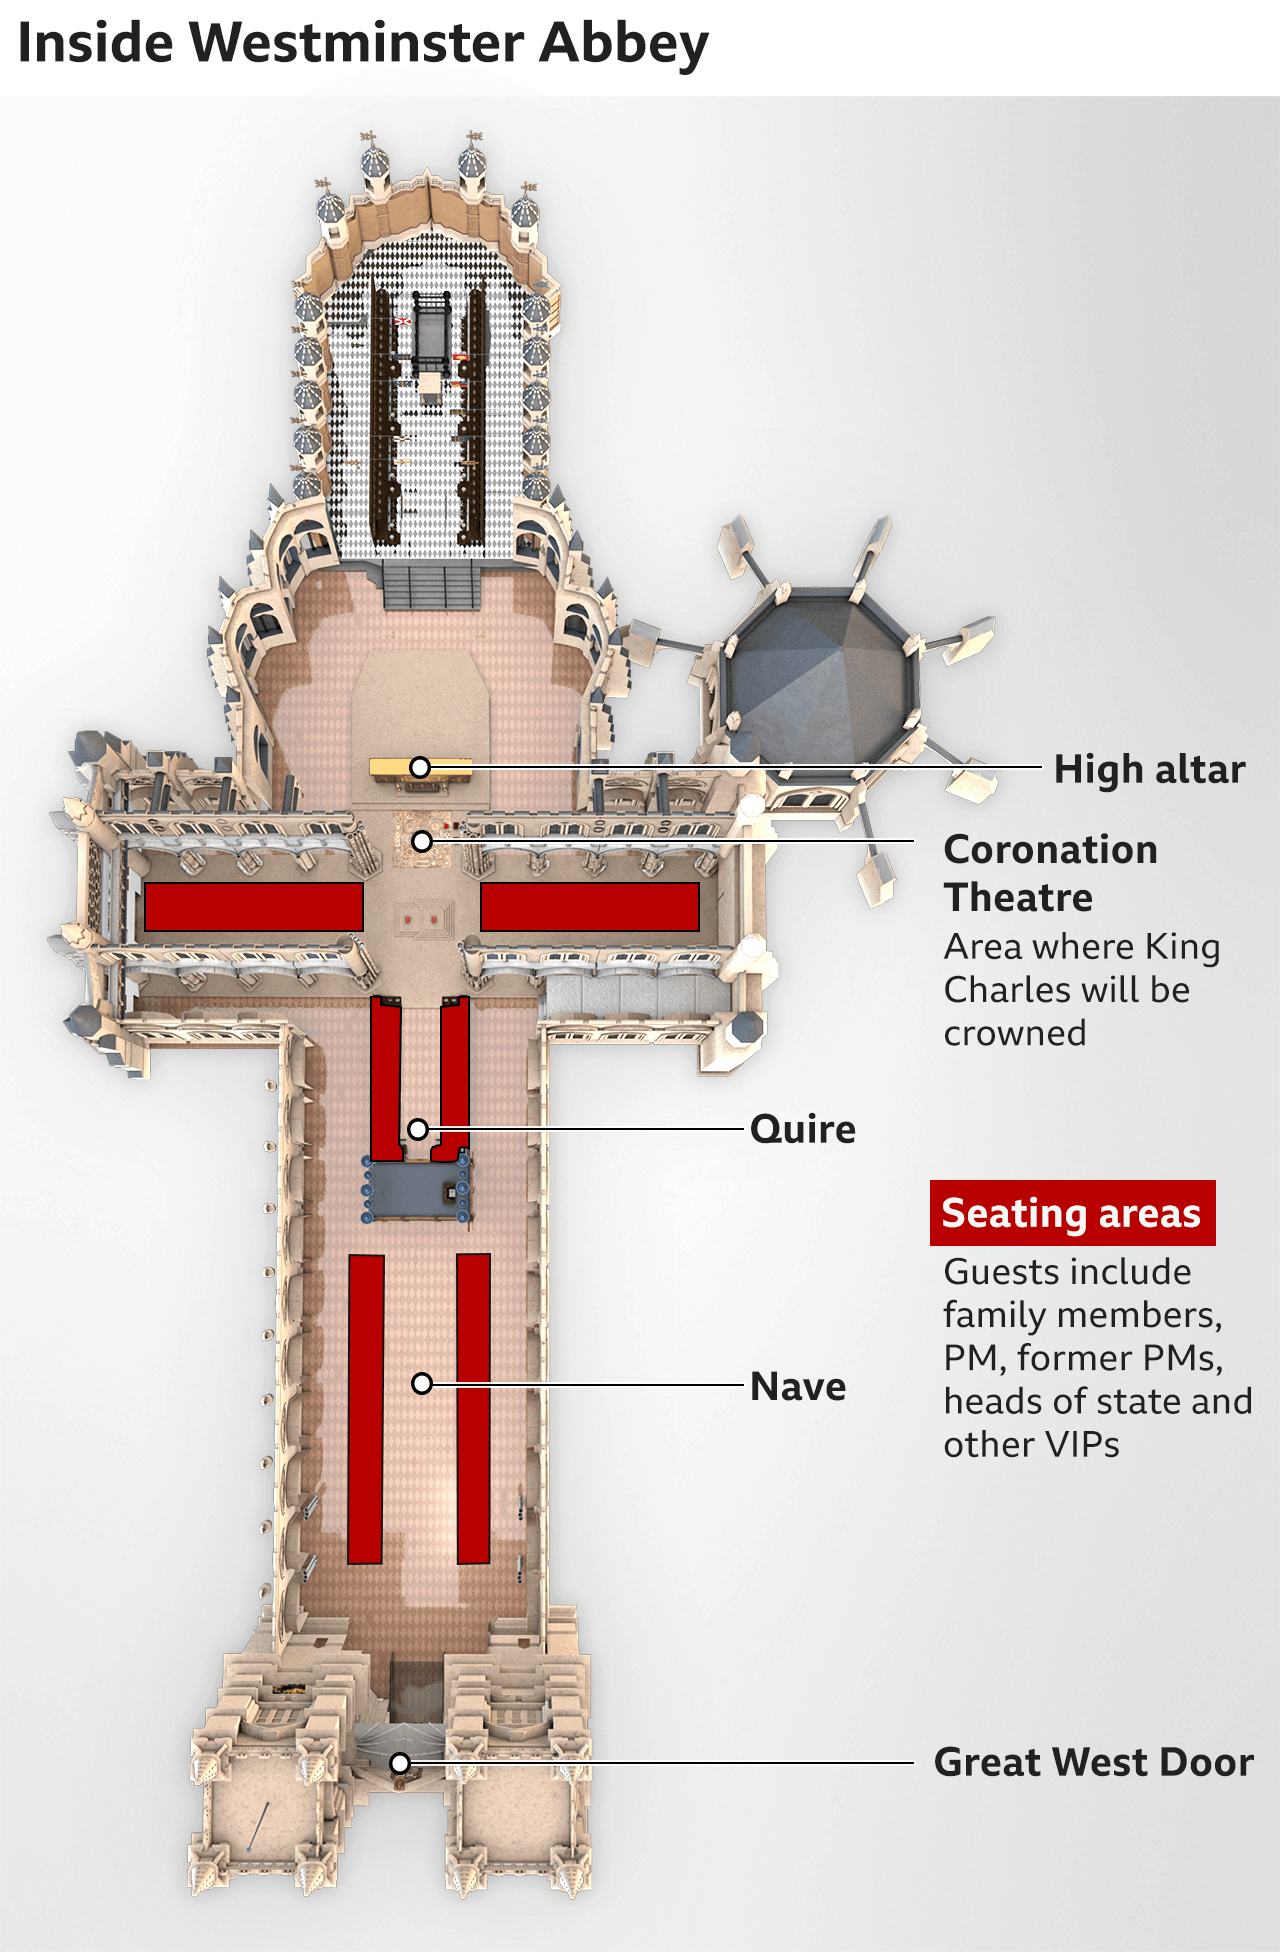 Graphic showing the inside Westminster Abbey and the position of the nave, quire, coronation area and the high altar